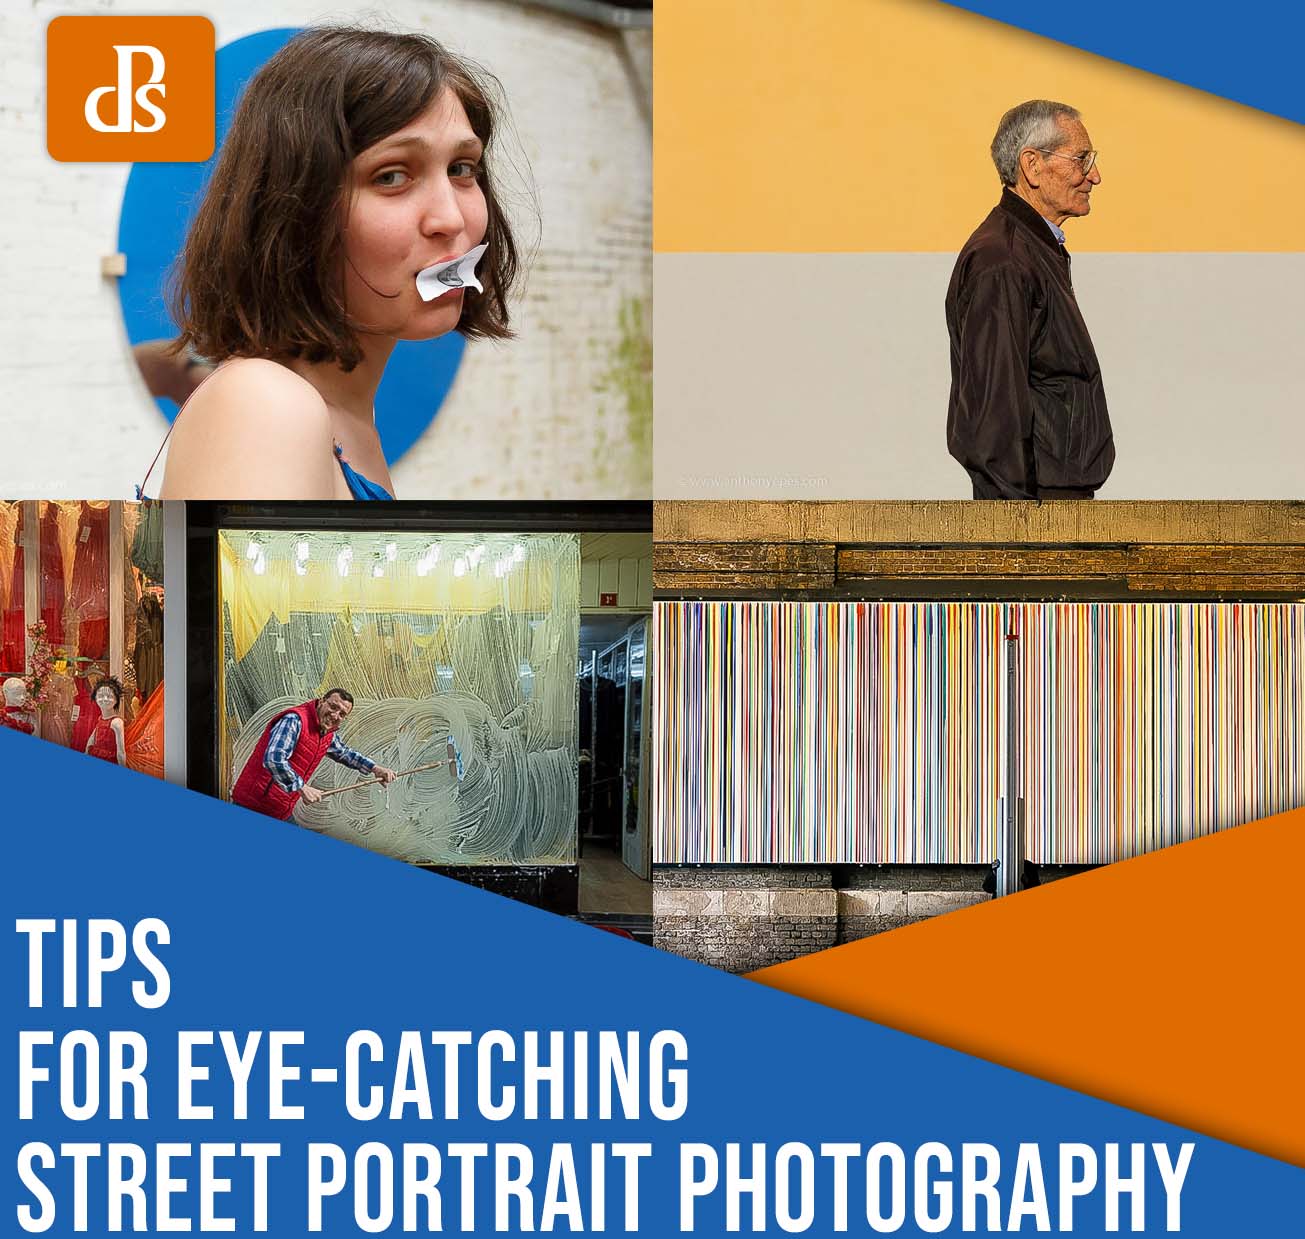 tips for eye-catching street portrait photography